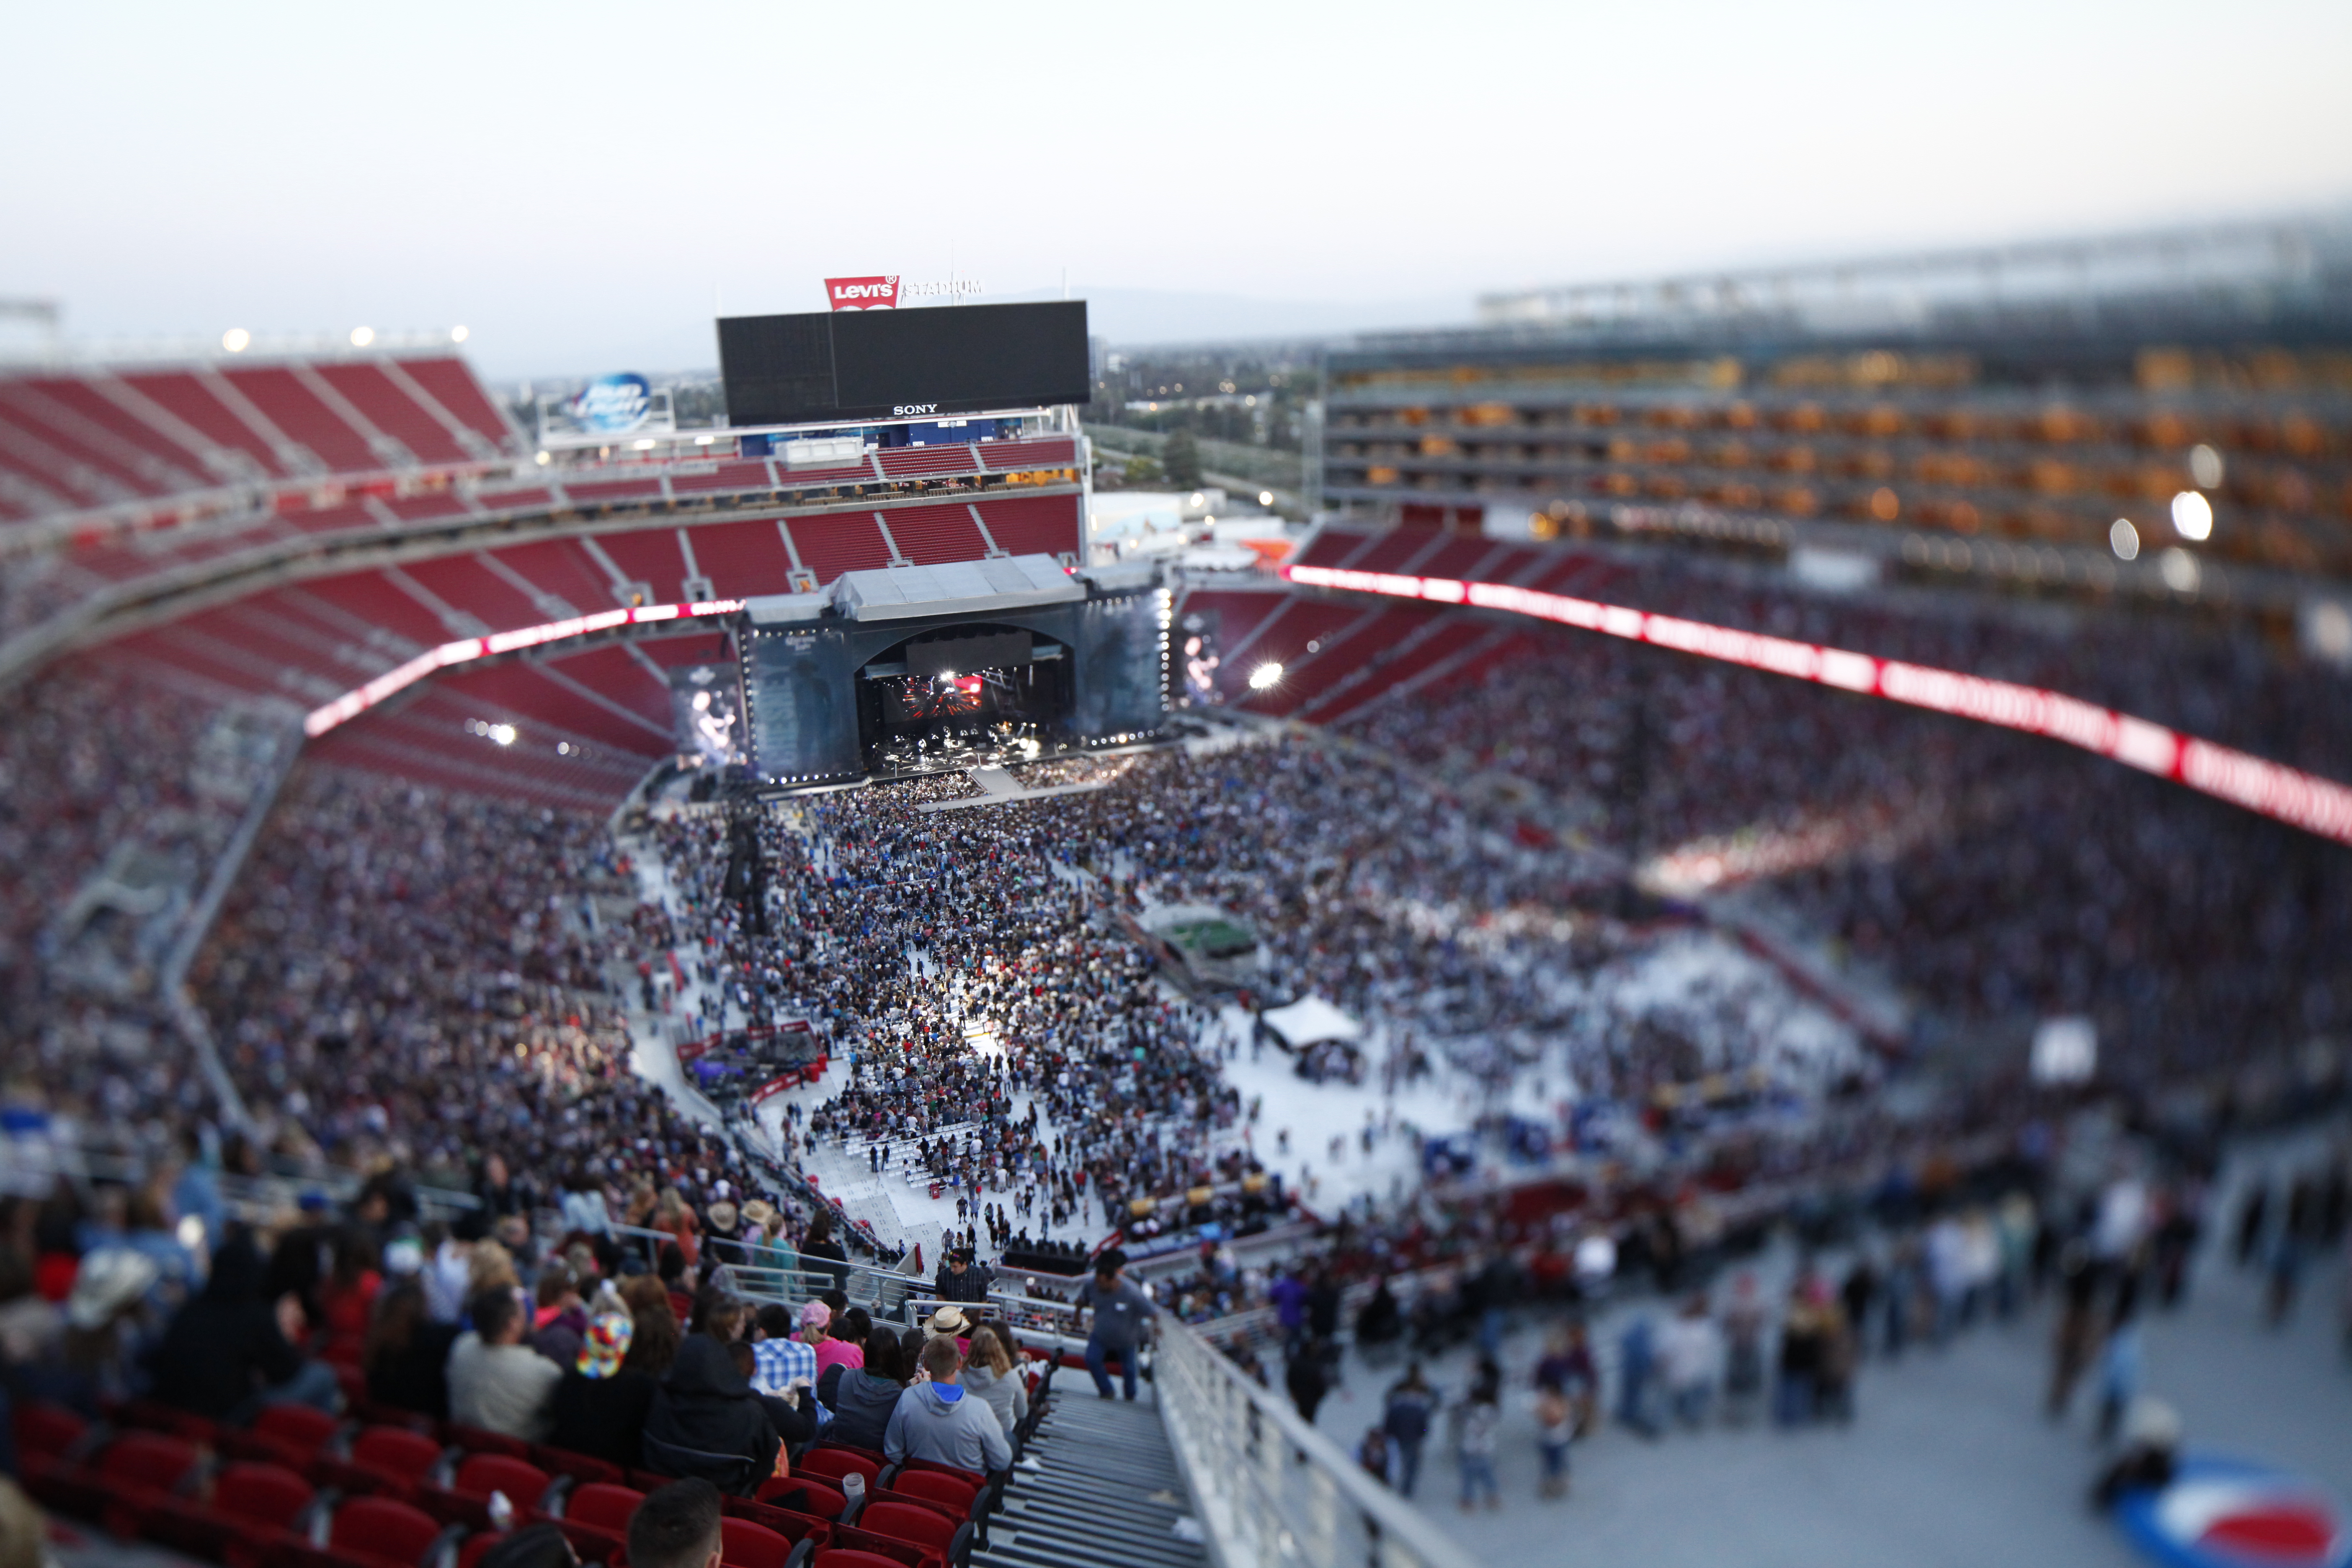 Favorite Moments from our First Concert - Levi's® Stadium